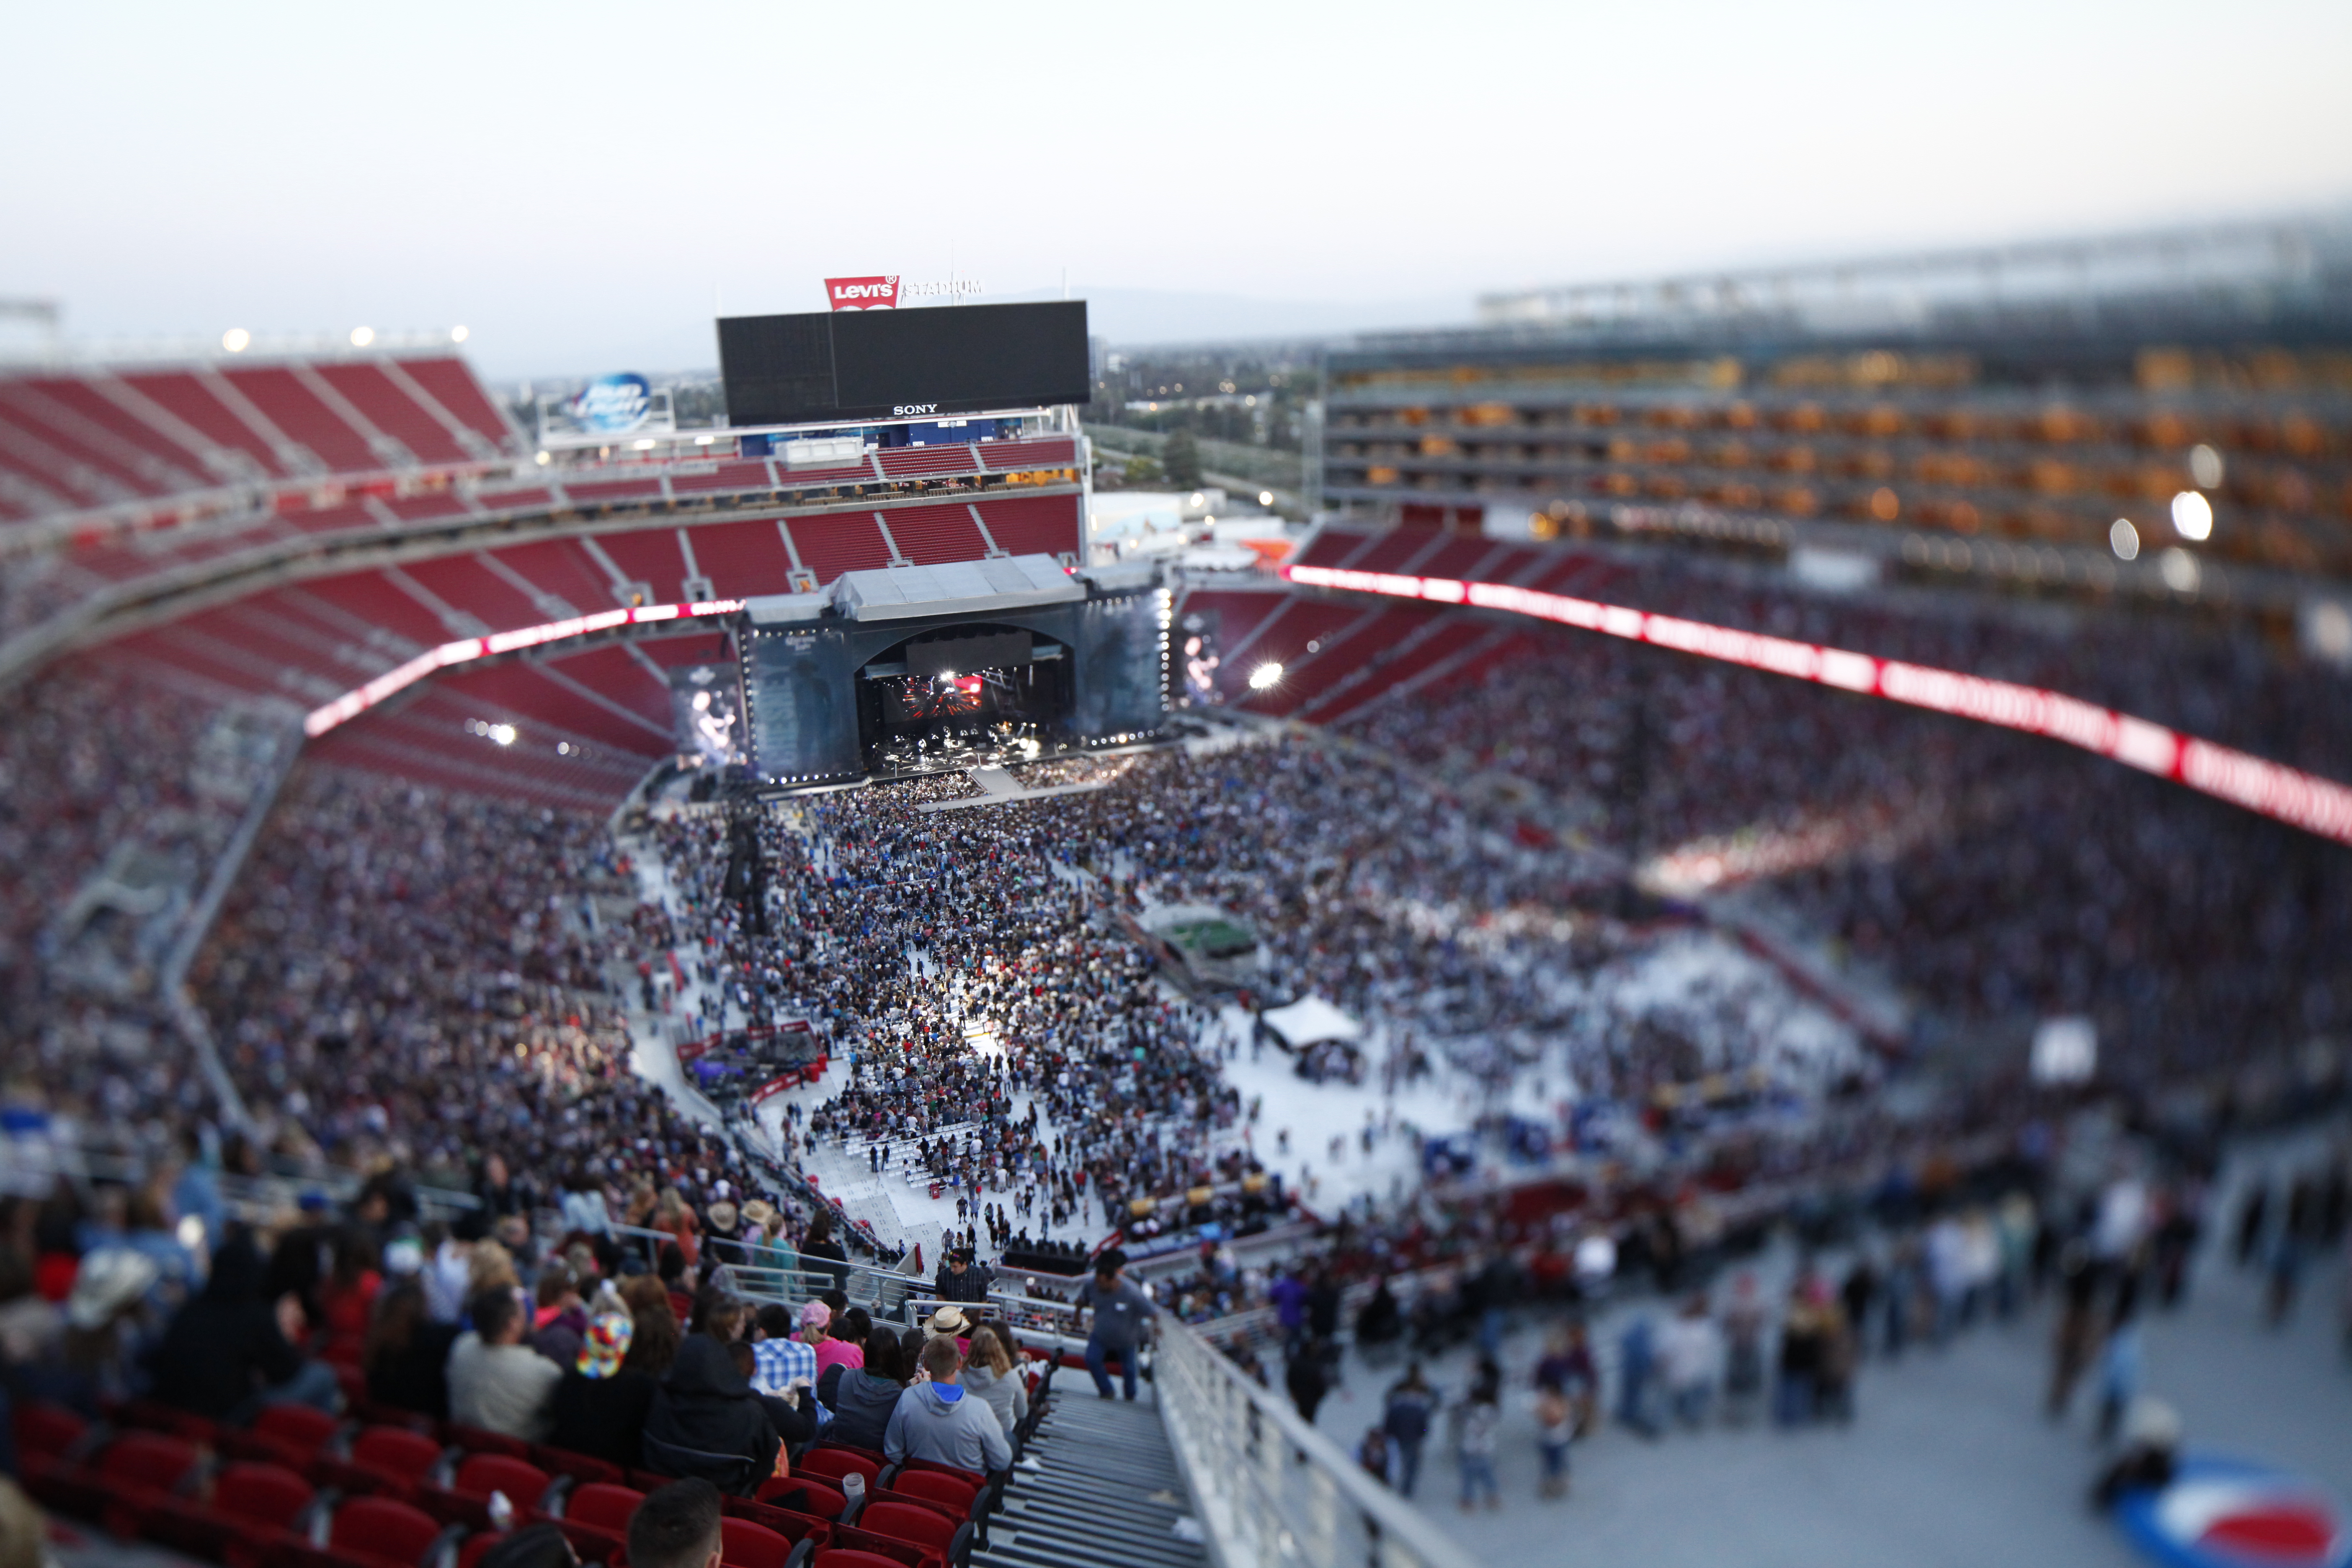 Favorite Moments from our First Concert - Levi's® Stadium